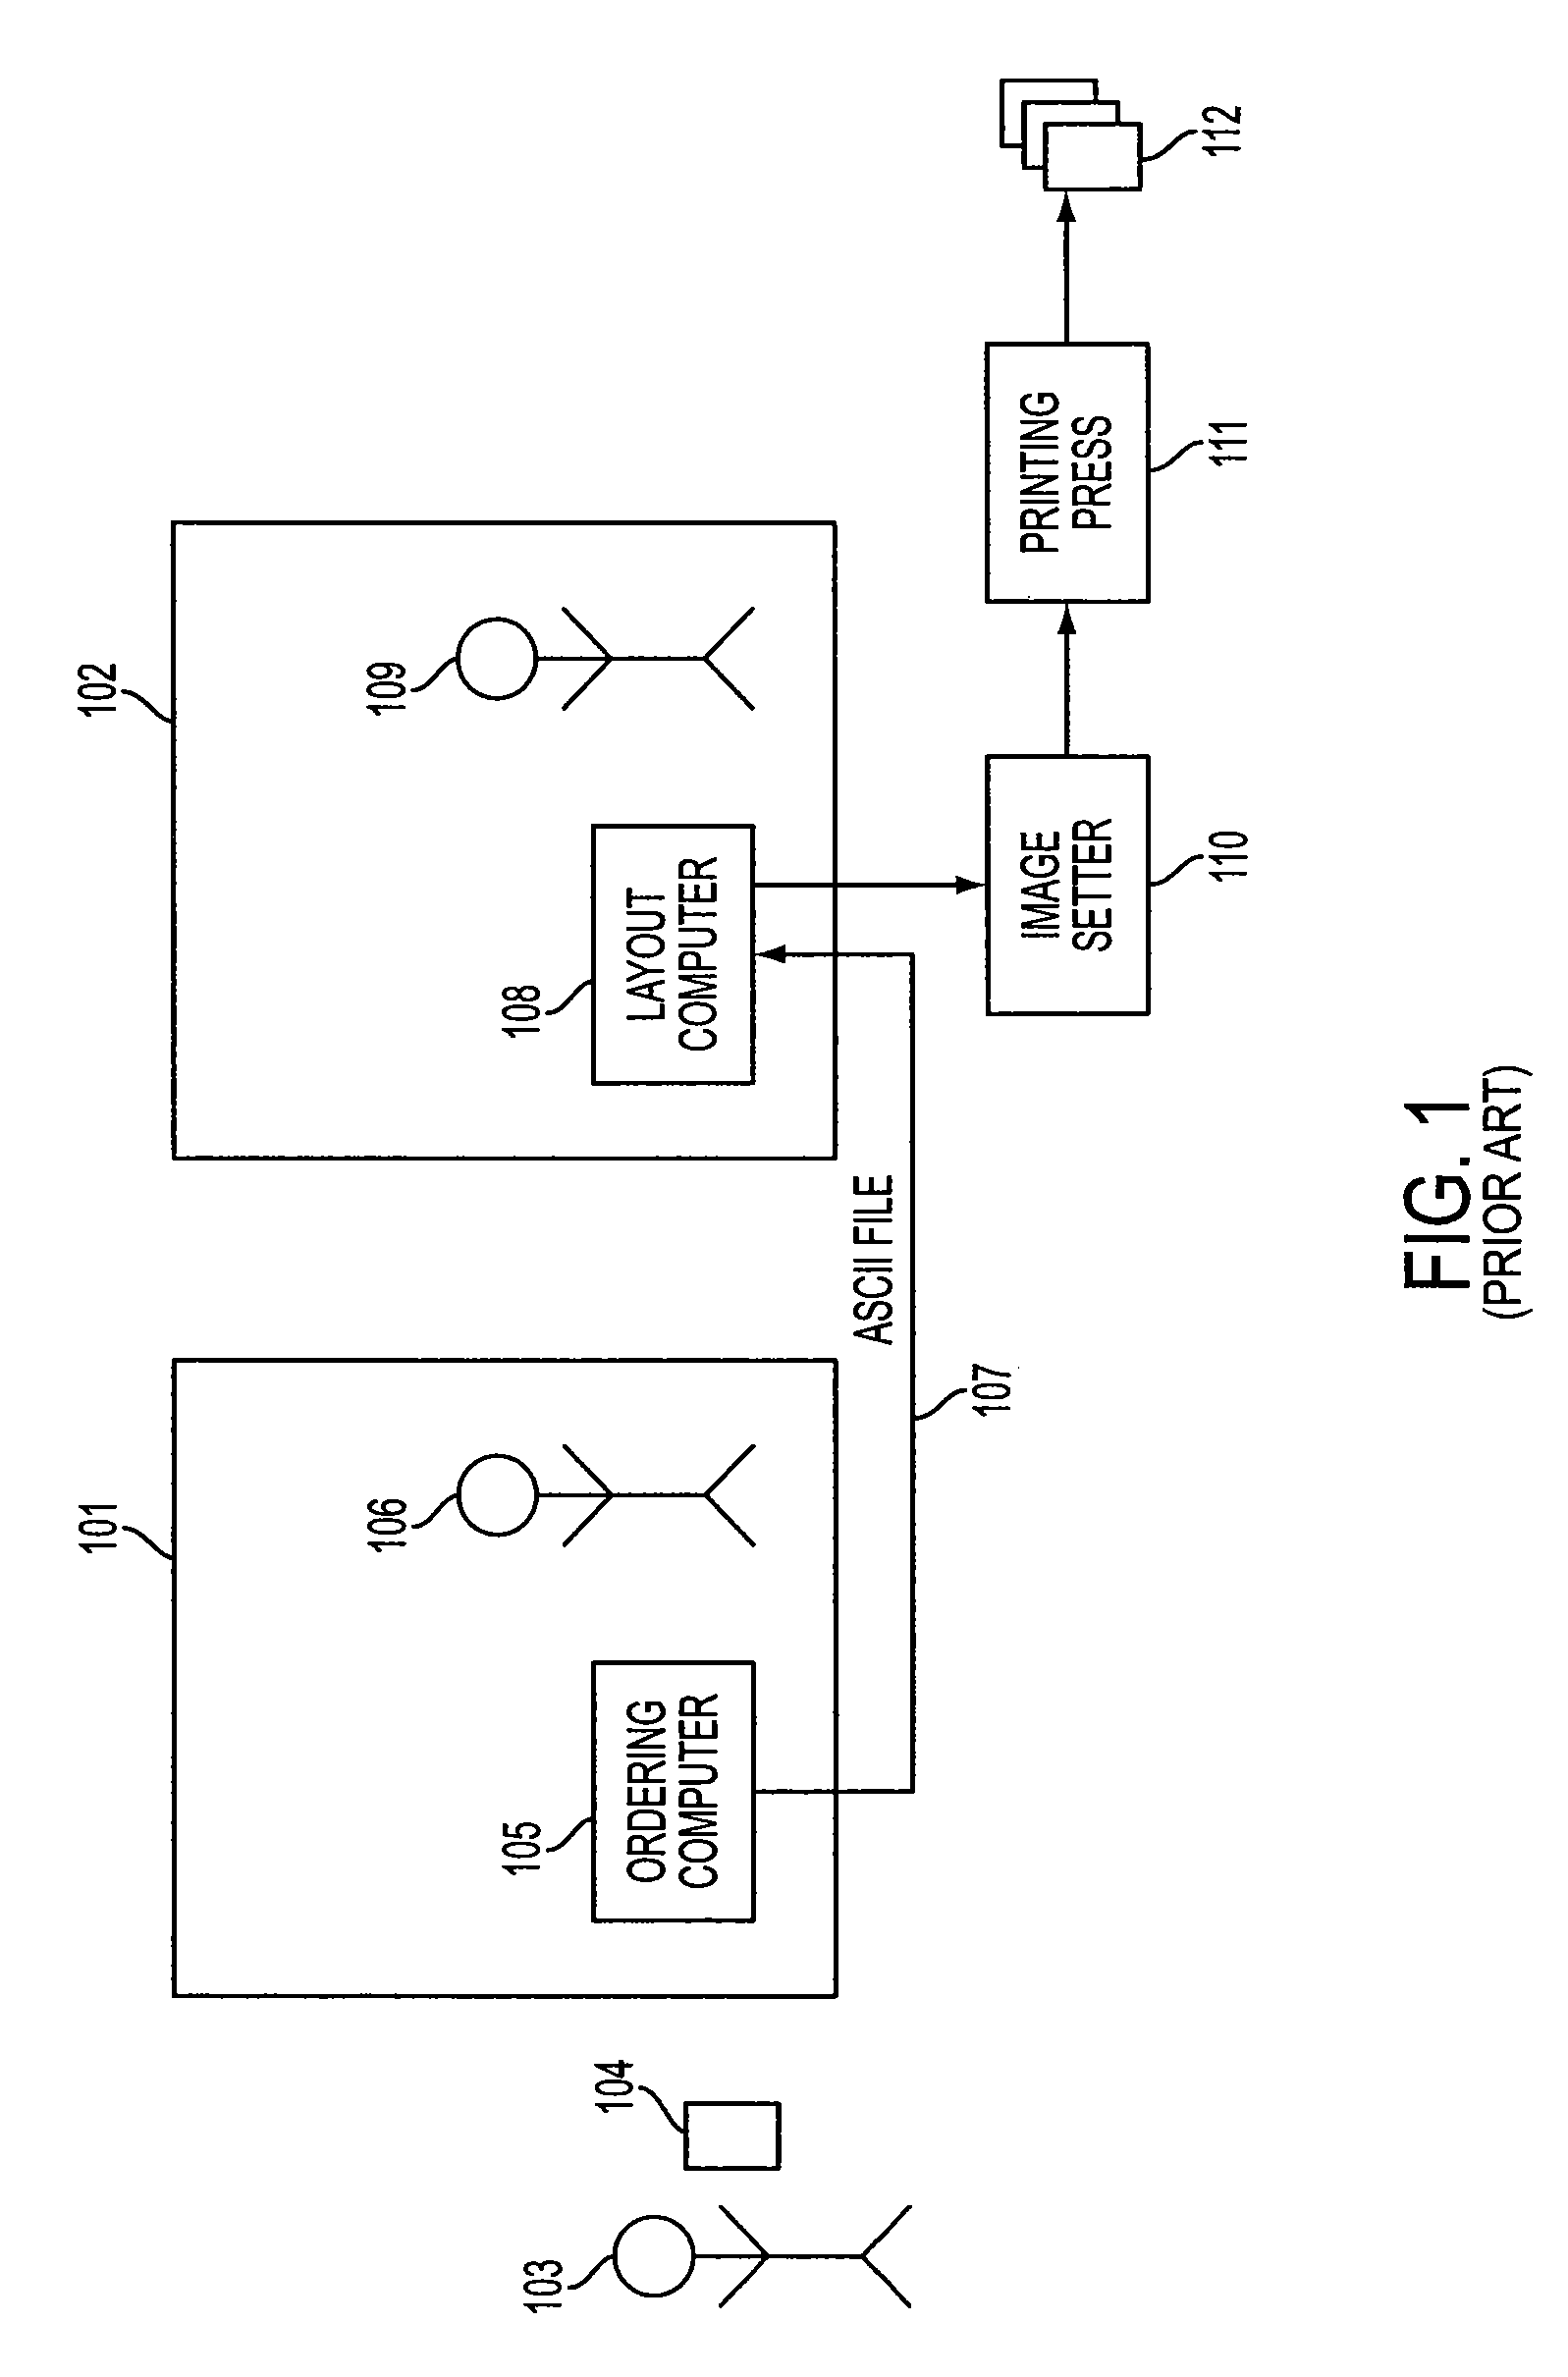 System and method of using a sales management system to generate printed products